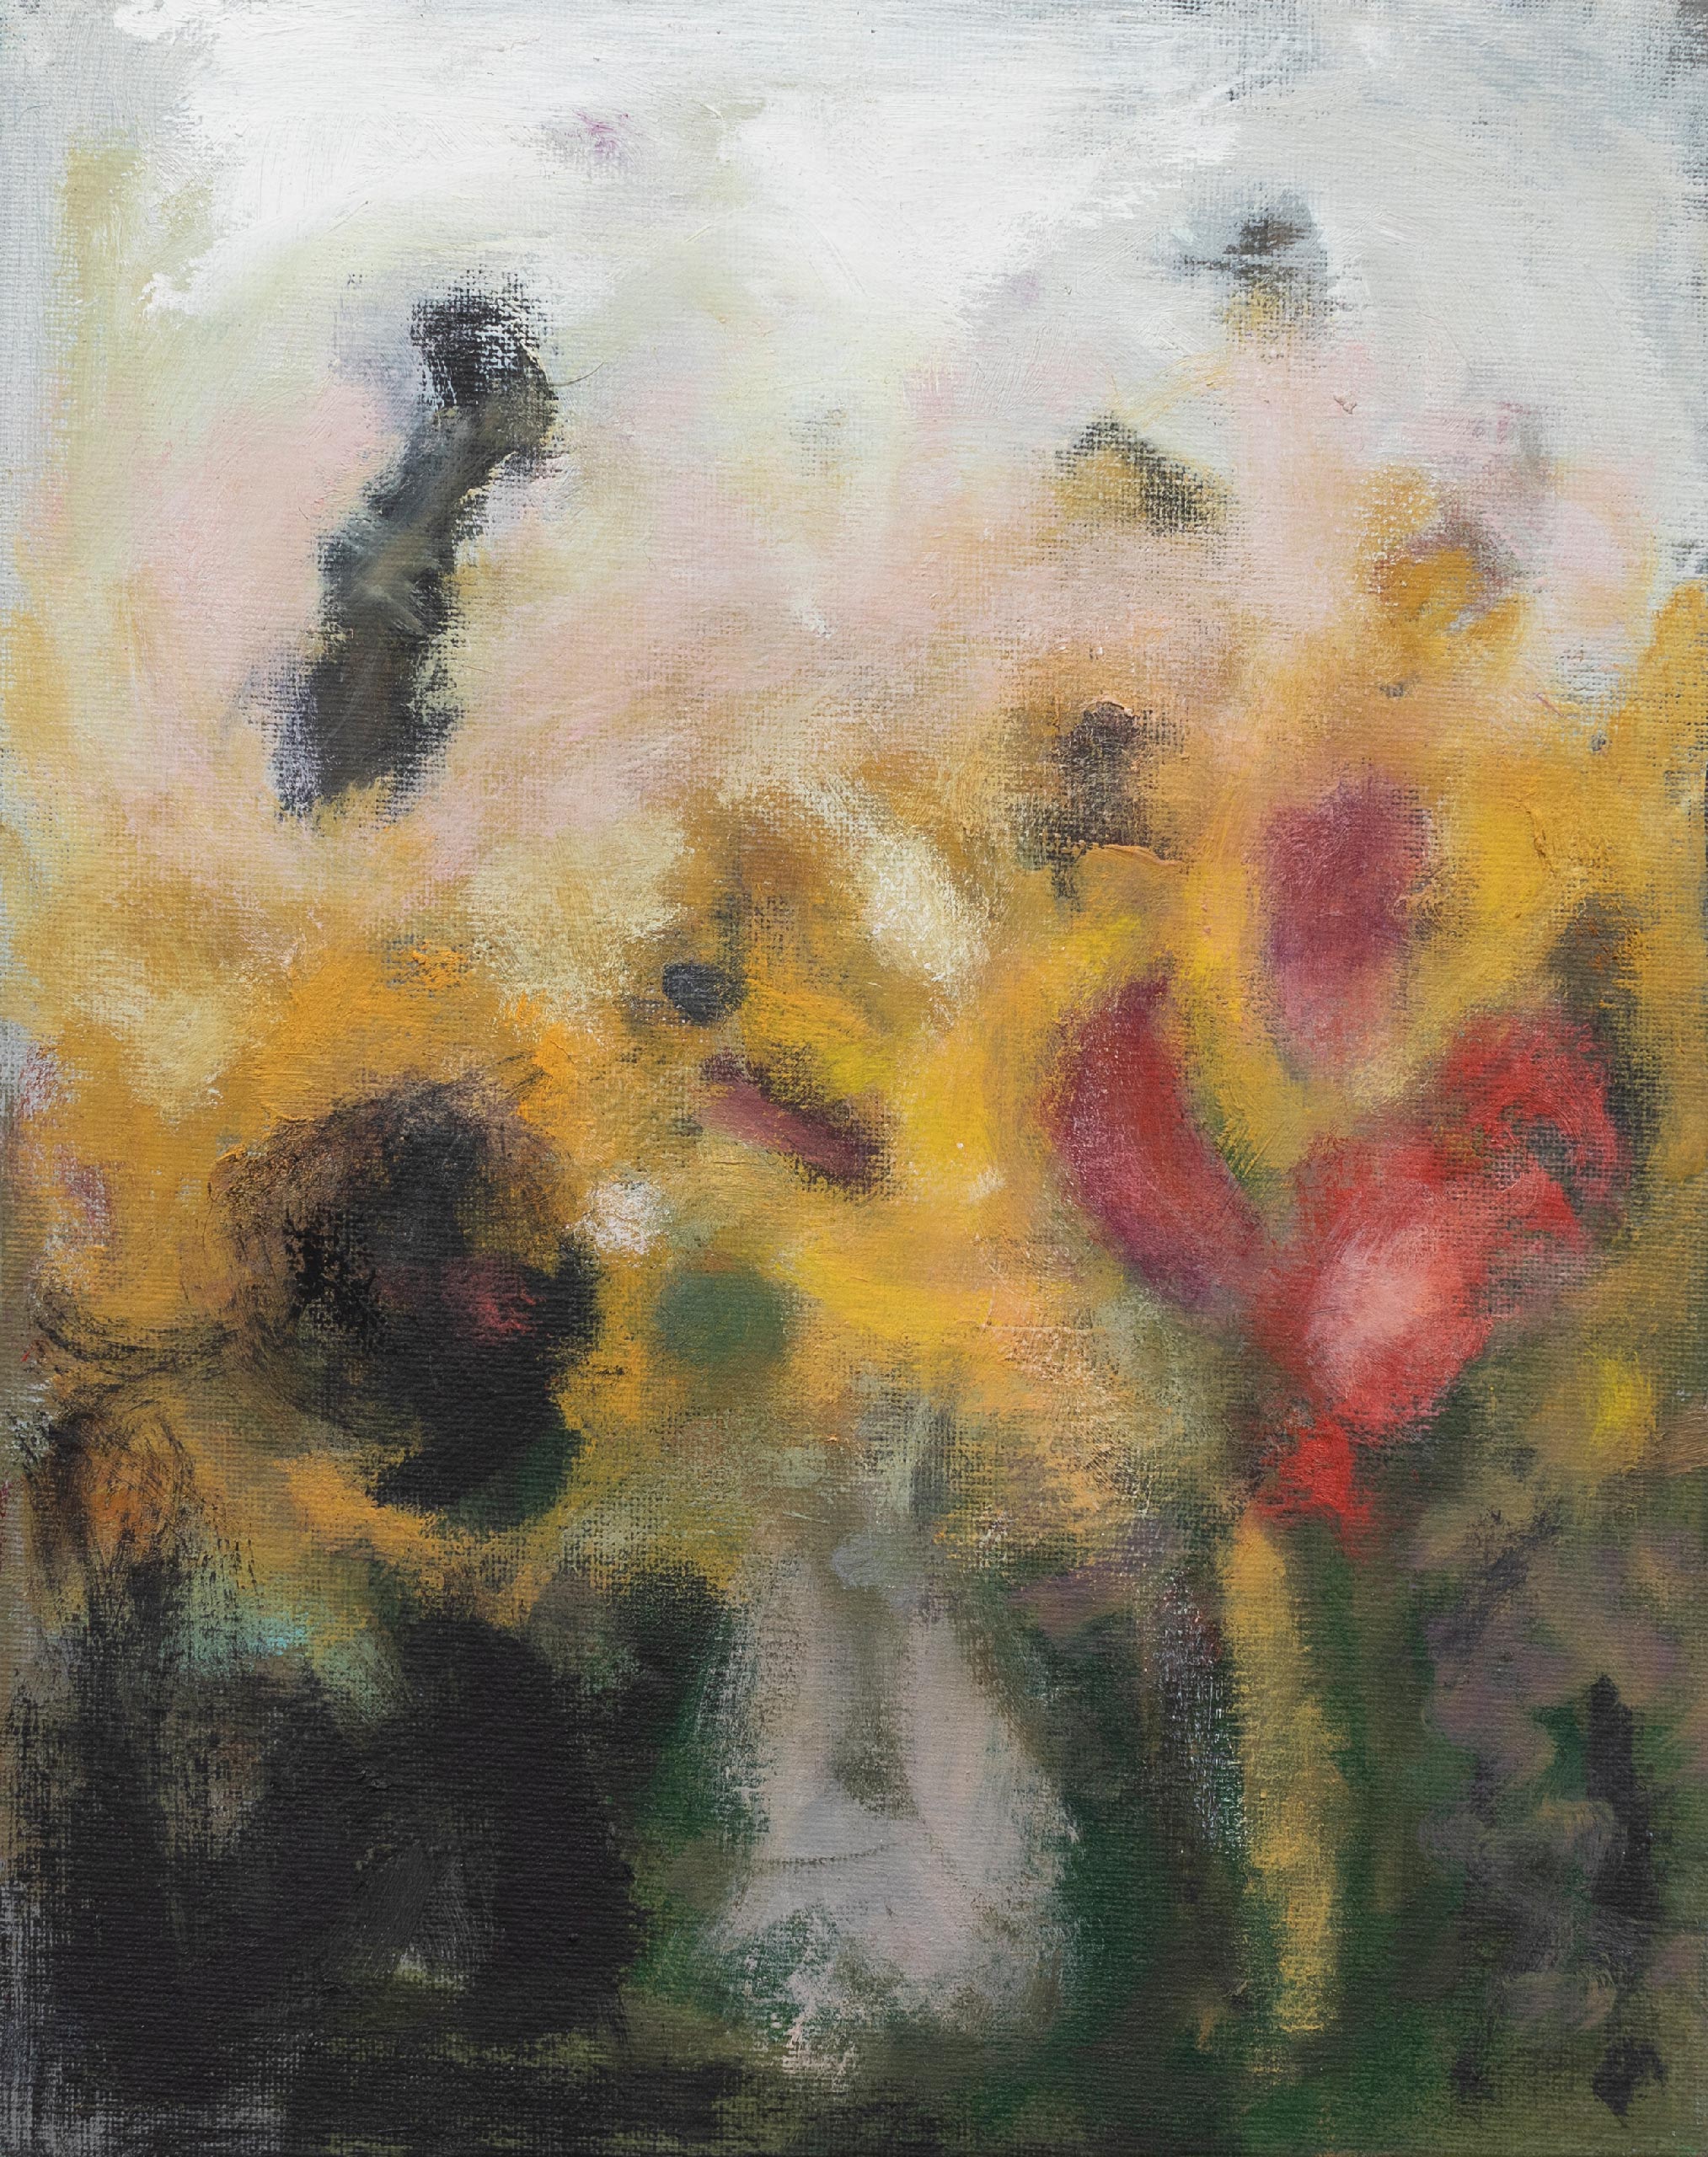 Butterflies and the boogie man, Oil on canvas, 2020, 30 × 24 cm